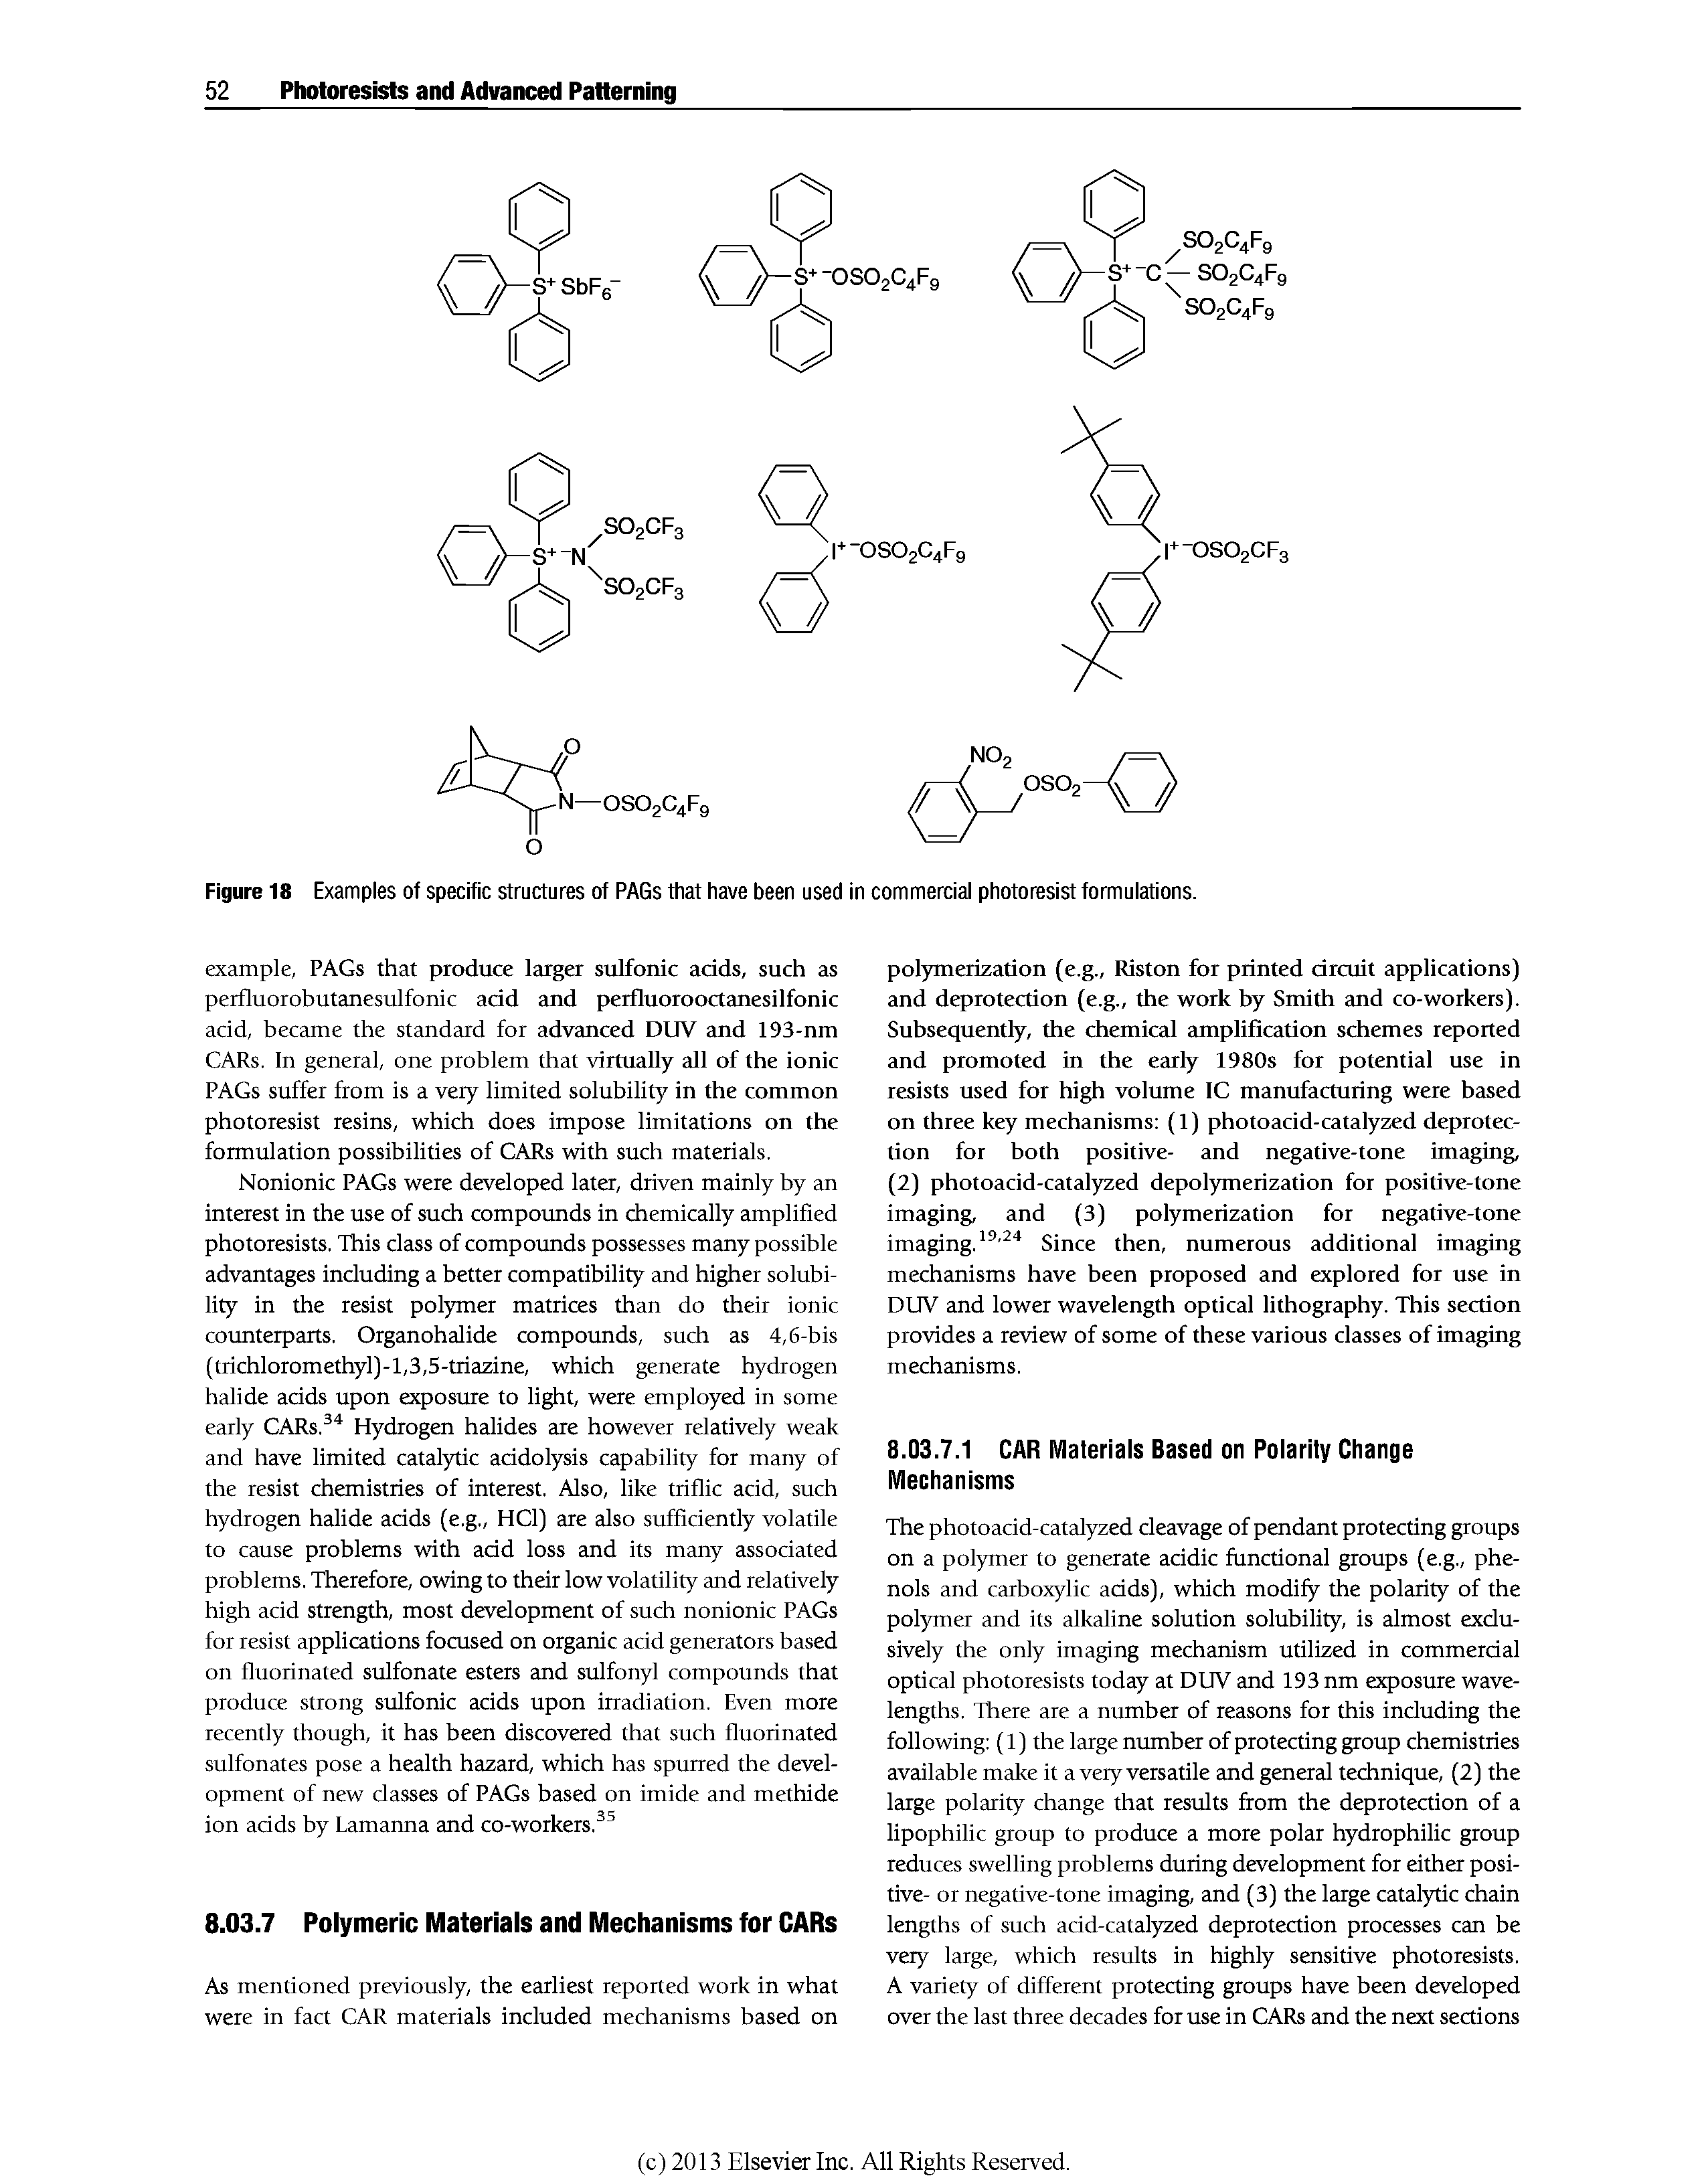 Figure 18 Examples of specific structures of PAGs that have been used in commercial photoresist formulations.